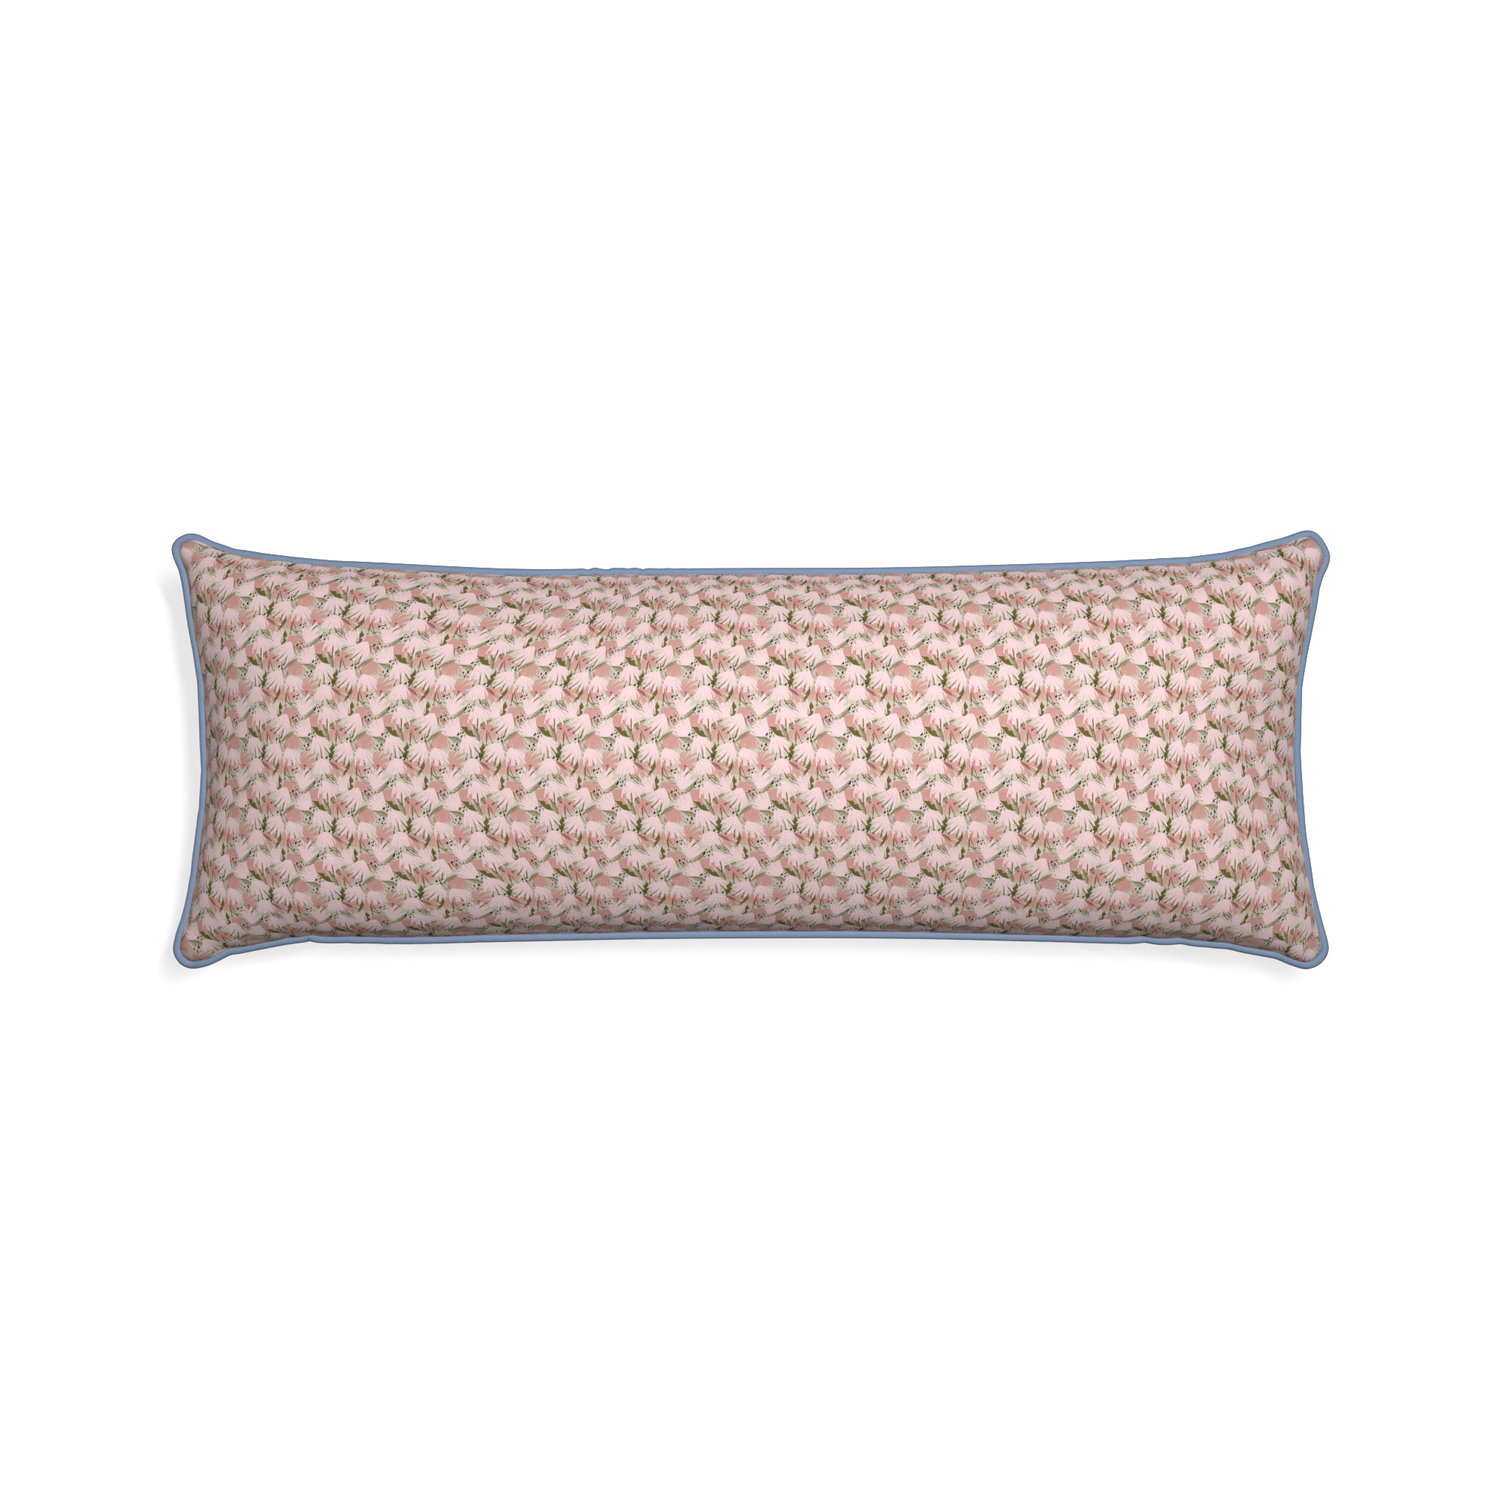 Xl-lumbar eden pink custom pink floralpillow with sky piping on white background